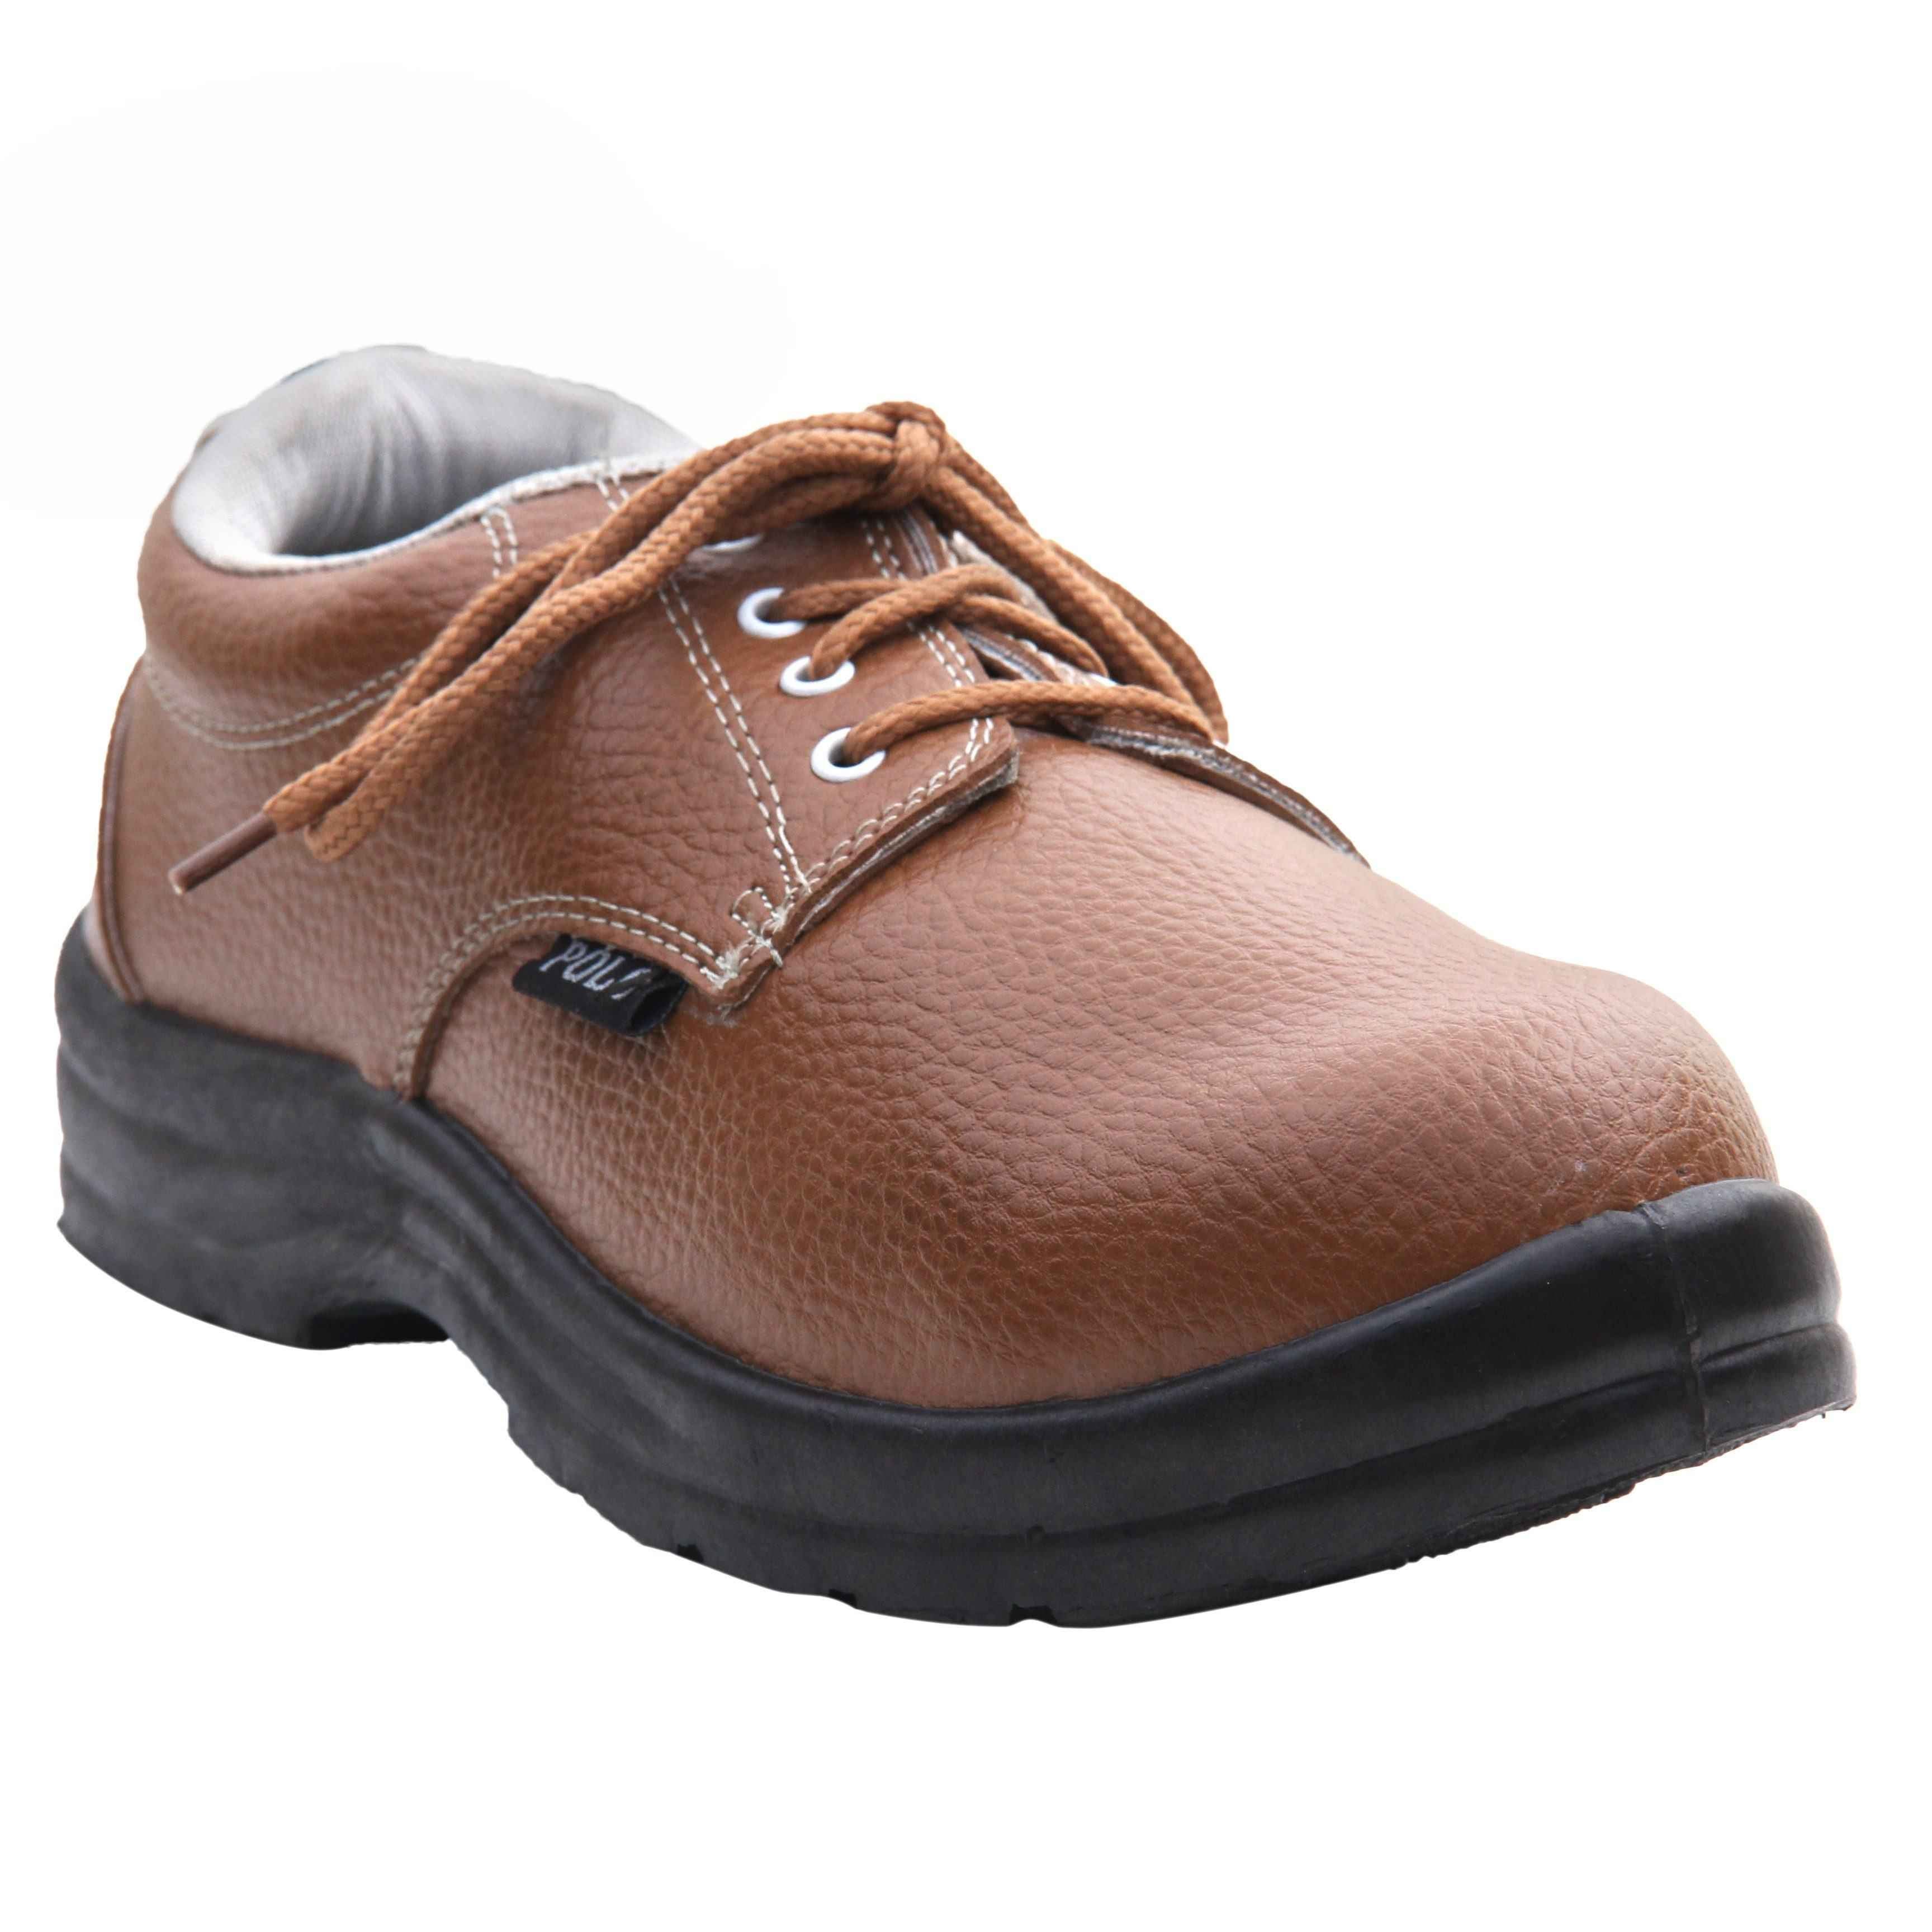 safety shoes size 9